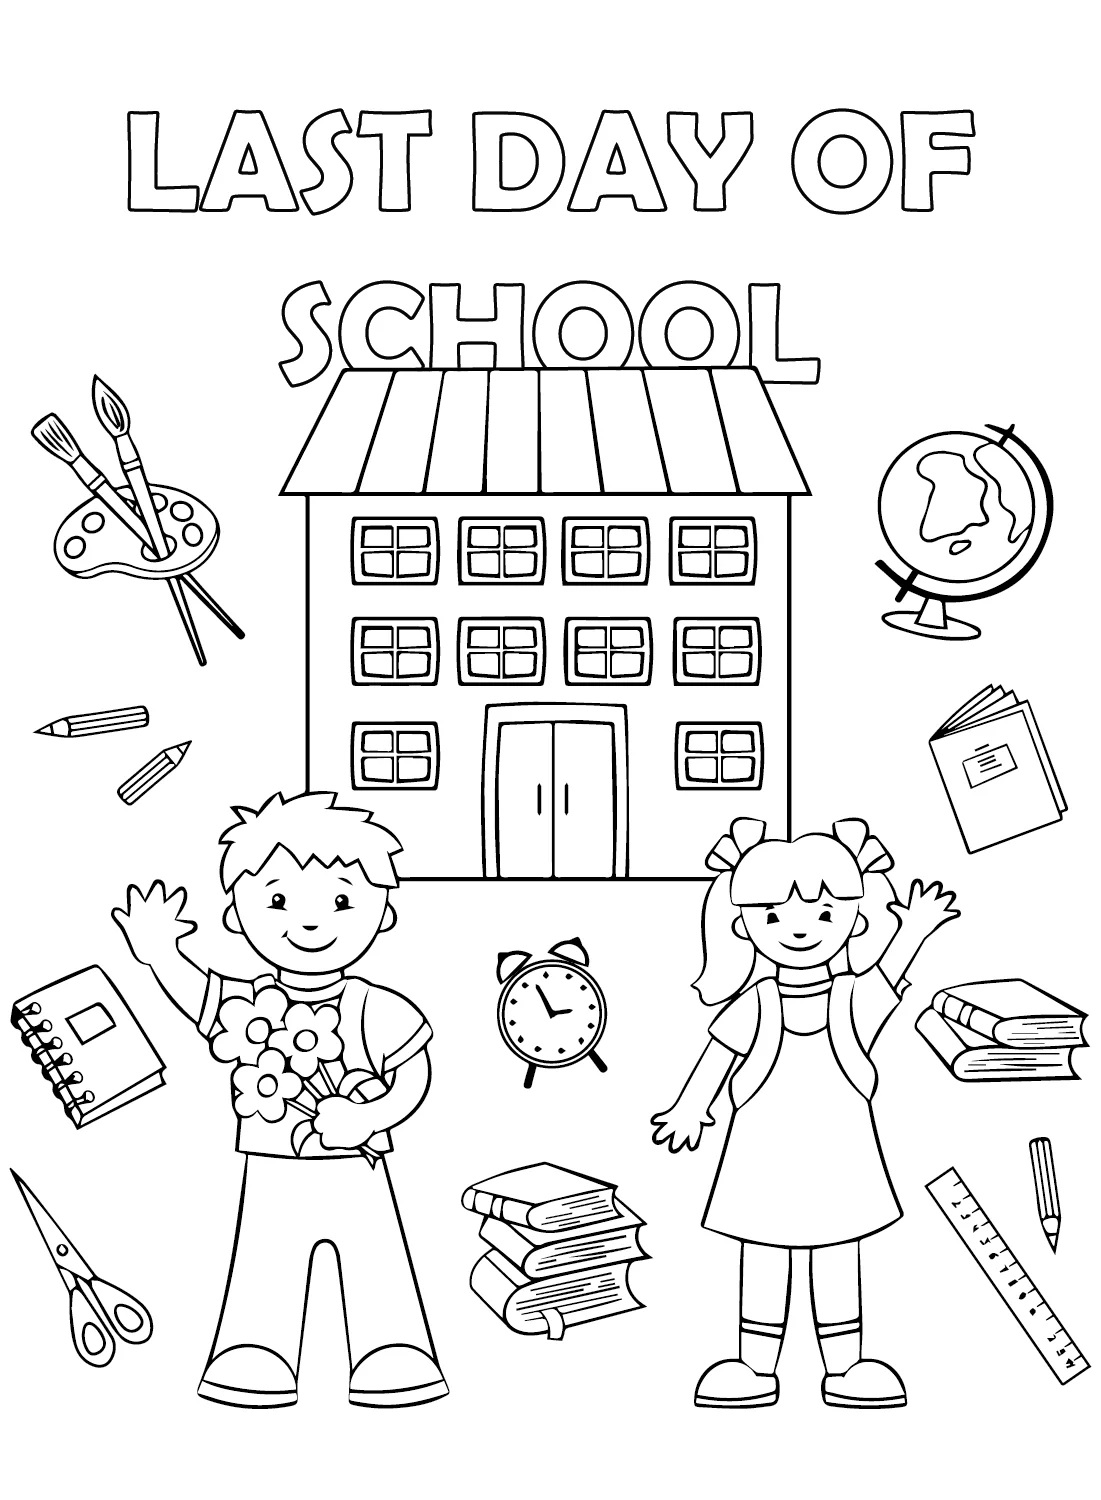 Last Day of School Printable coloring page Download, Print or Color